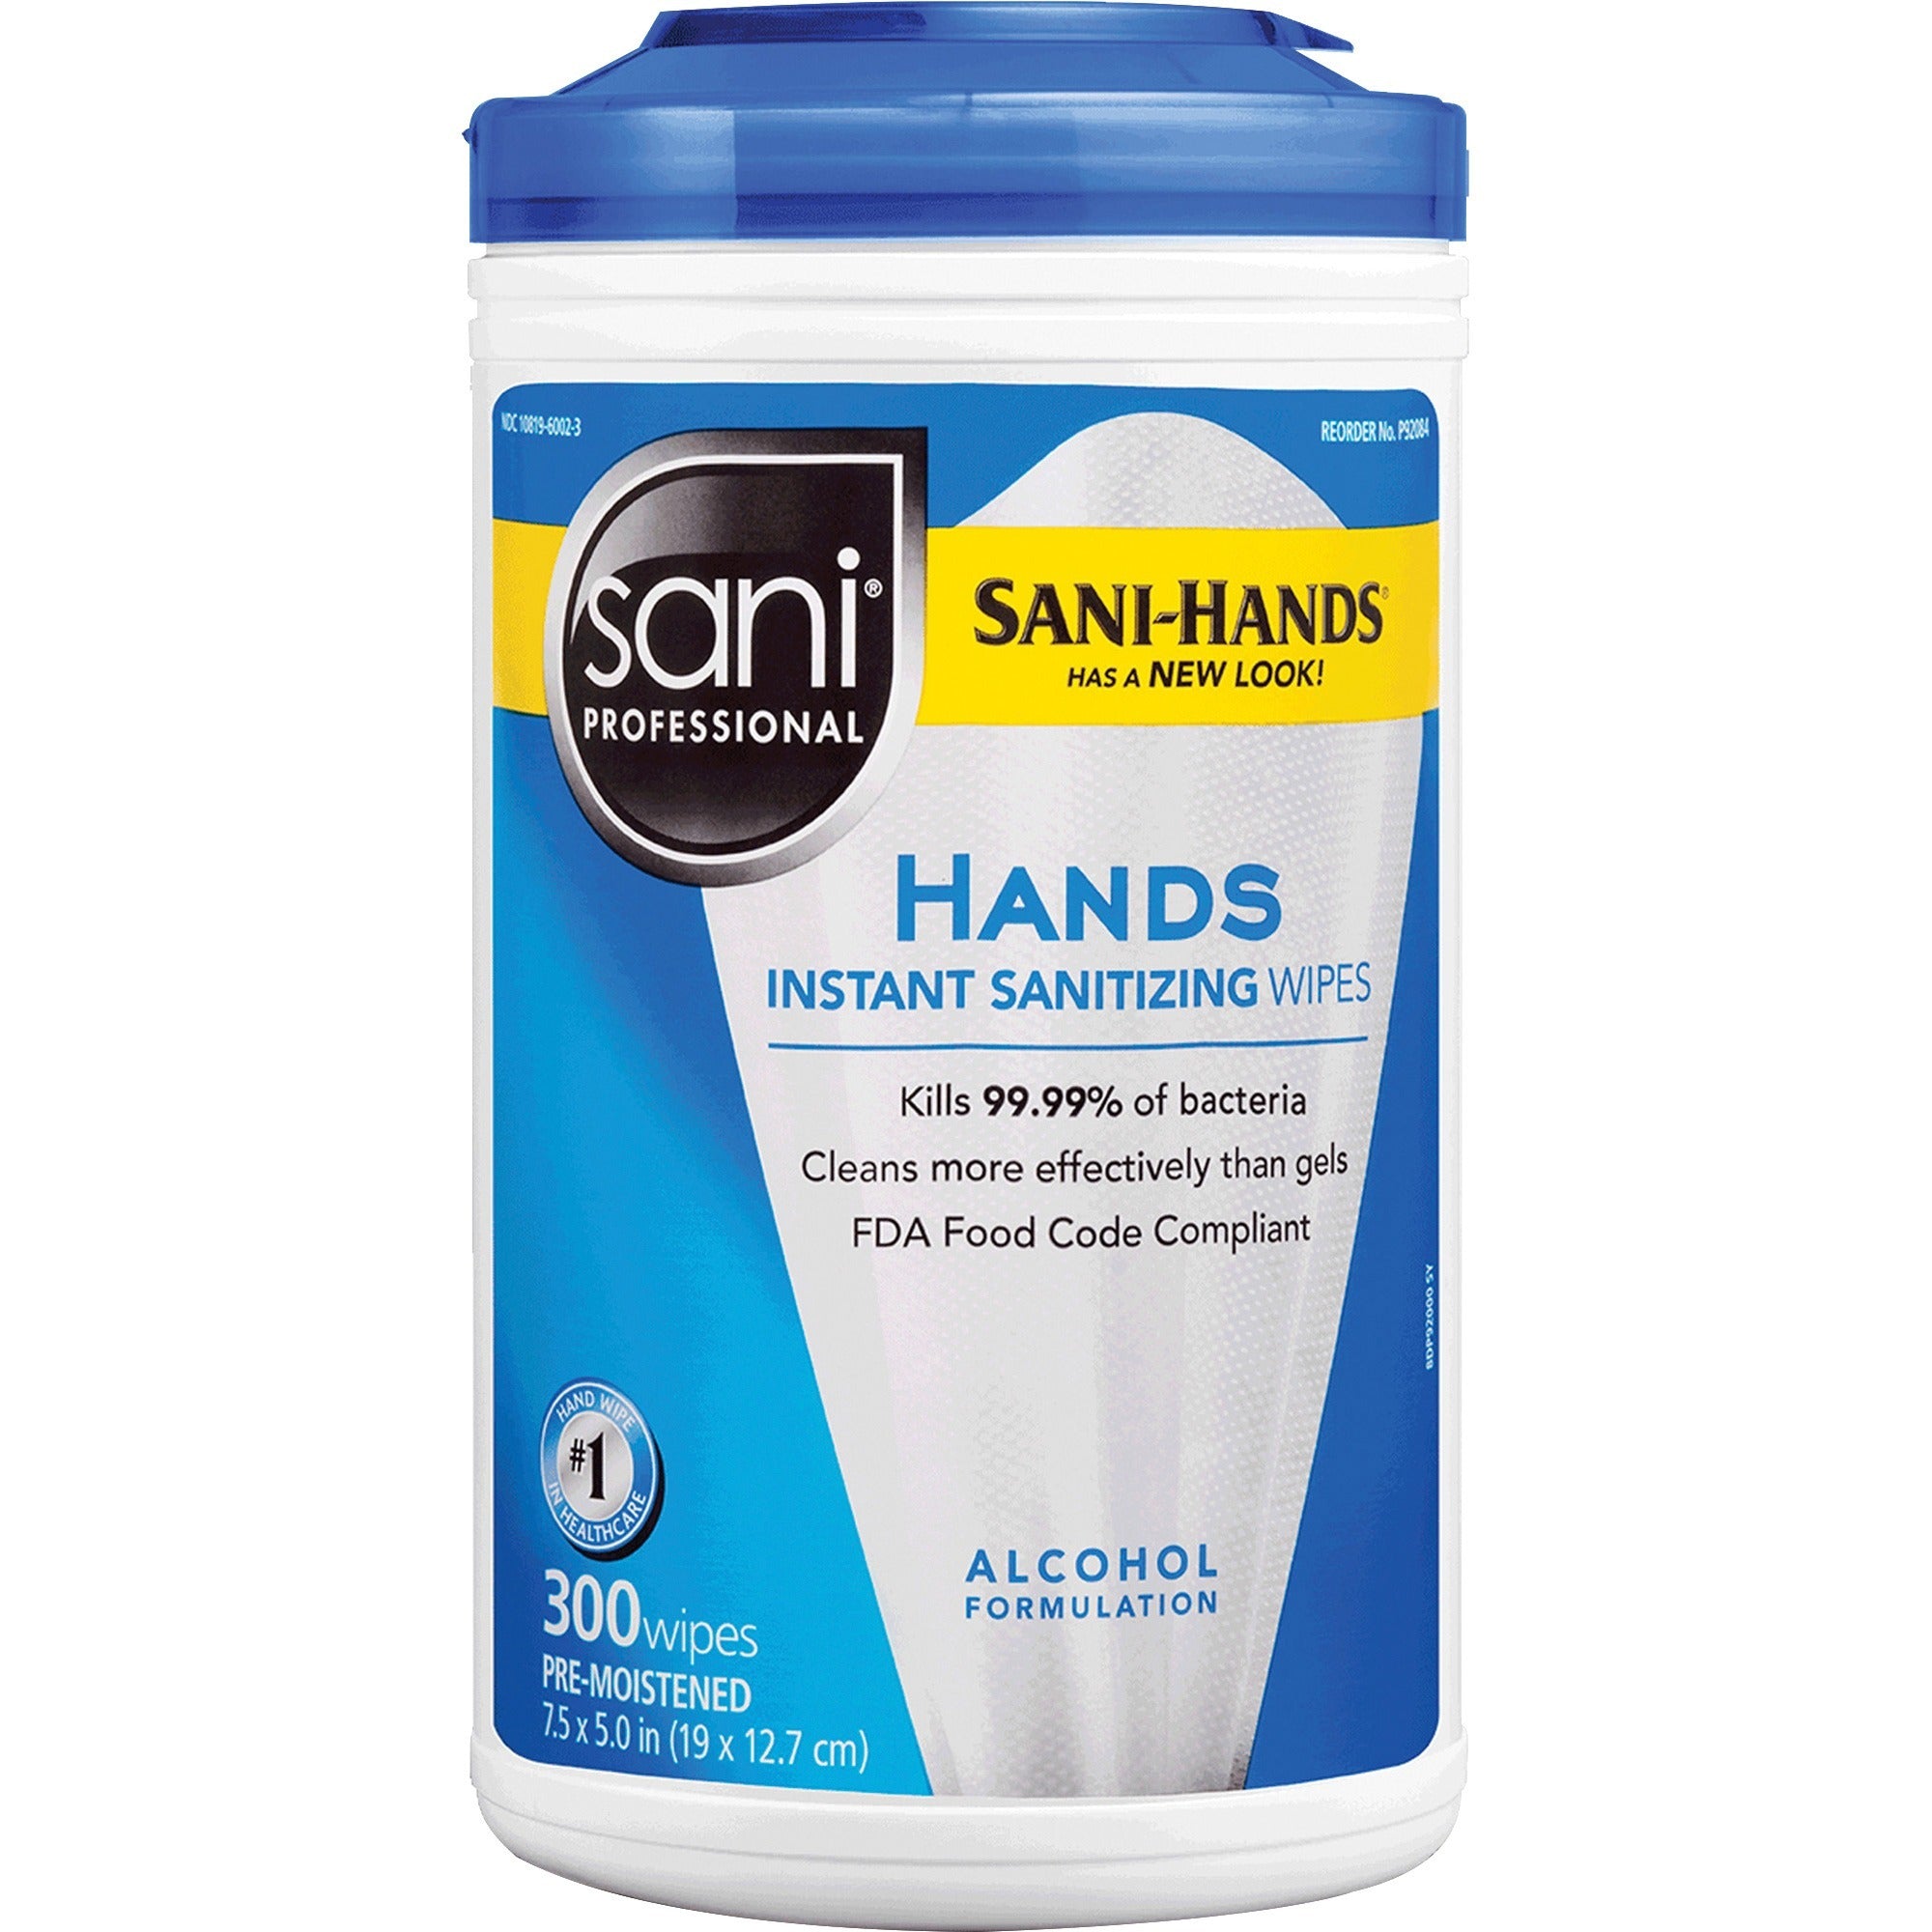 pdi-hands-instant-sanitizing-wipes-white-moisturizing-for-hand-food-service-300-per-canister-1-each_pdip92084 - 1